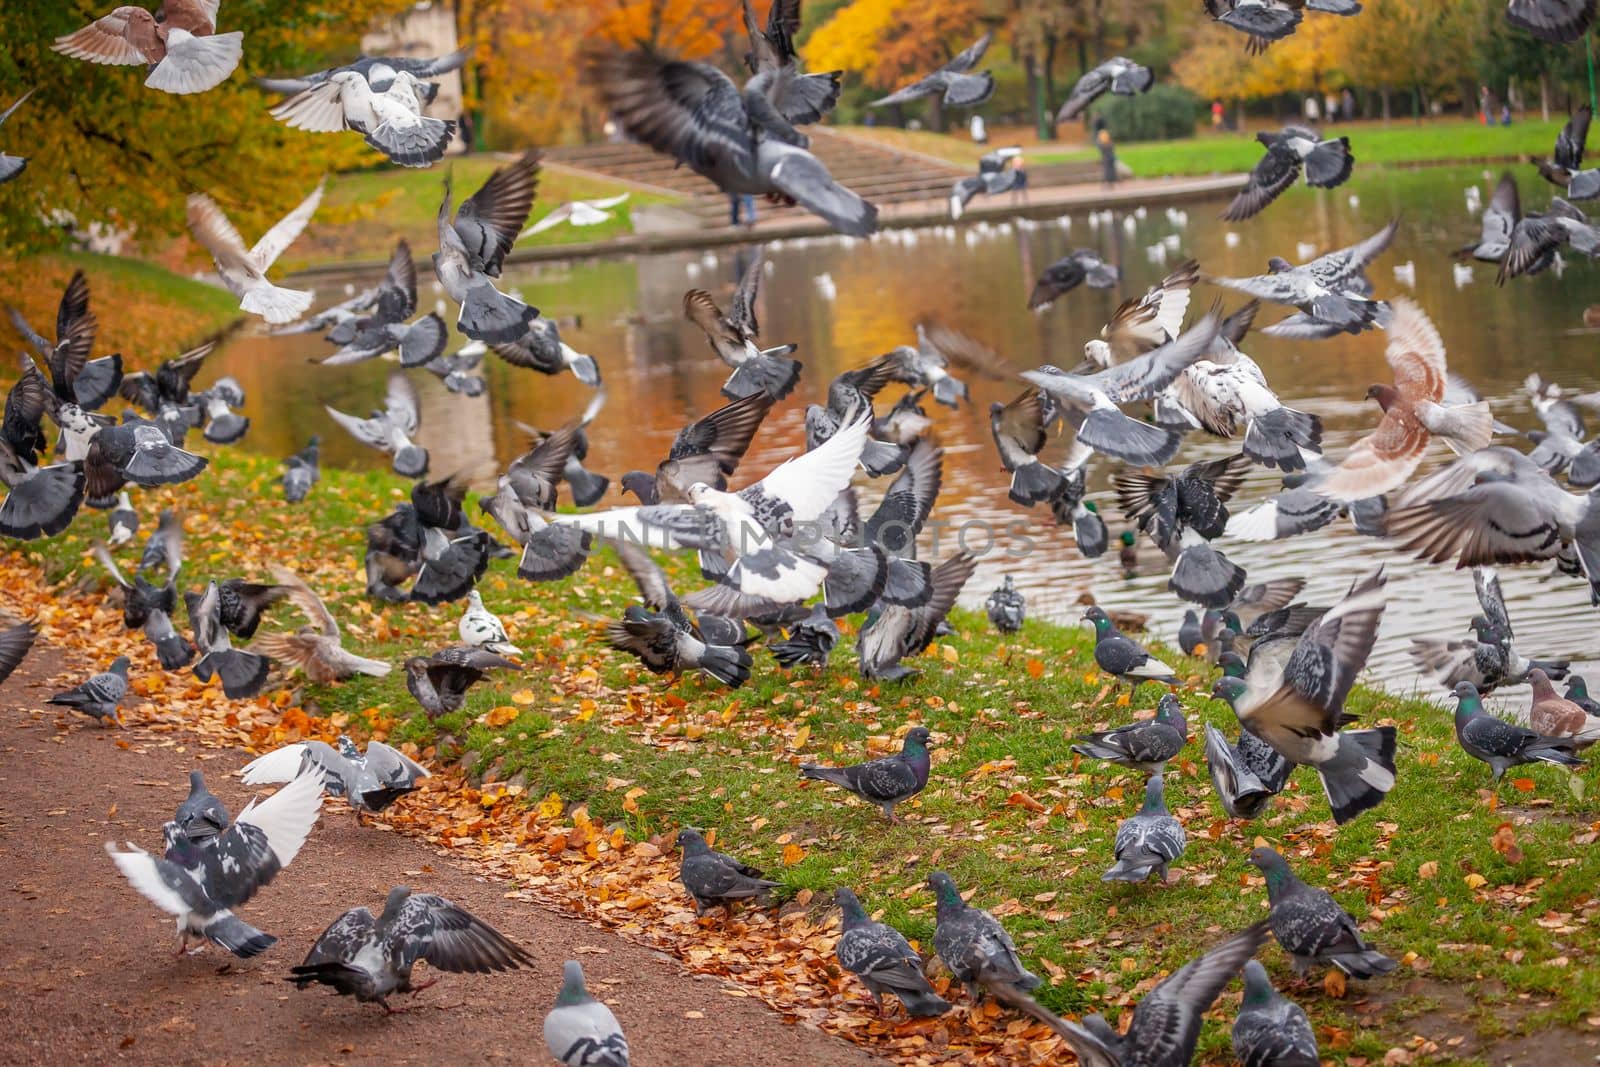 Flock of pigeons and doves in Central park of New York City at autumn, United States